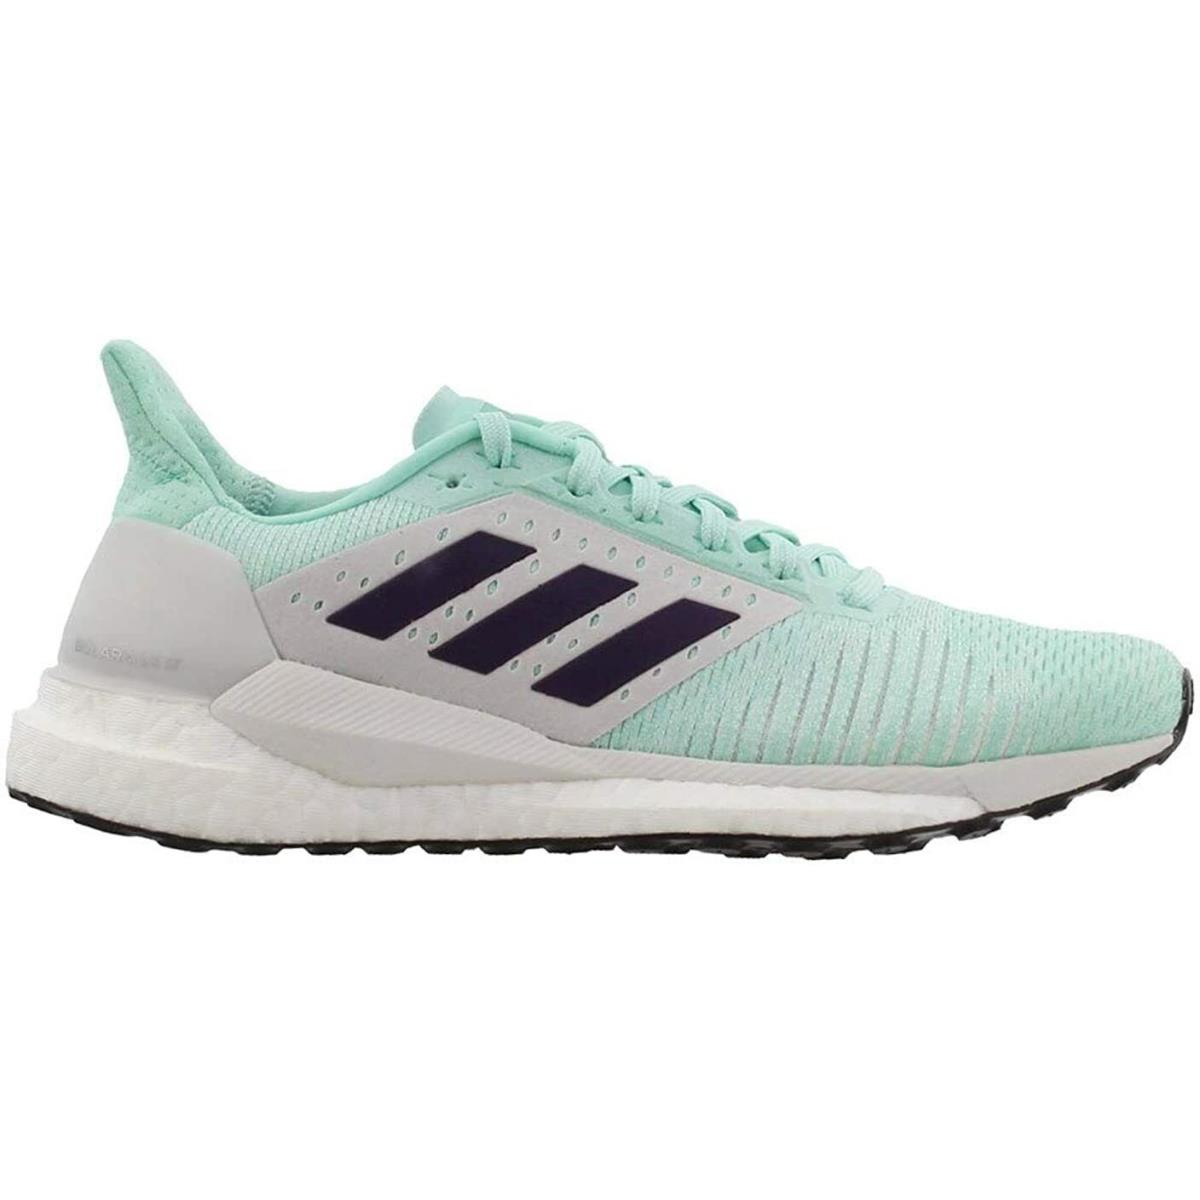 Adidas Women`s Solar Glide ST Running Casual Shoe Mint/grey Color Size 5.5